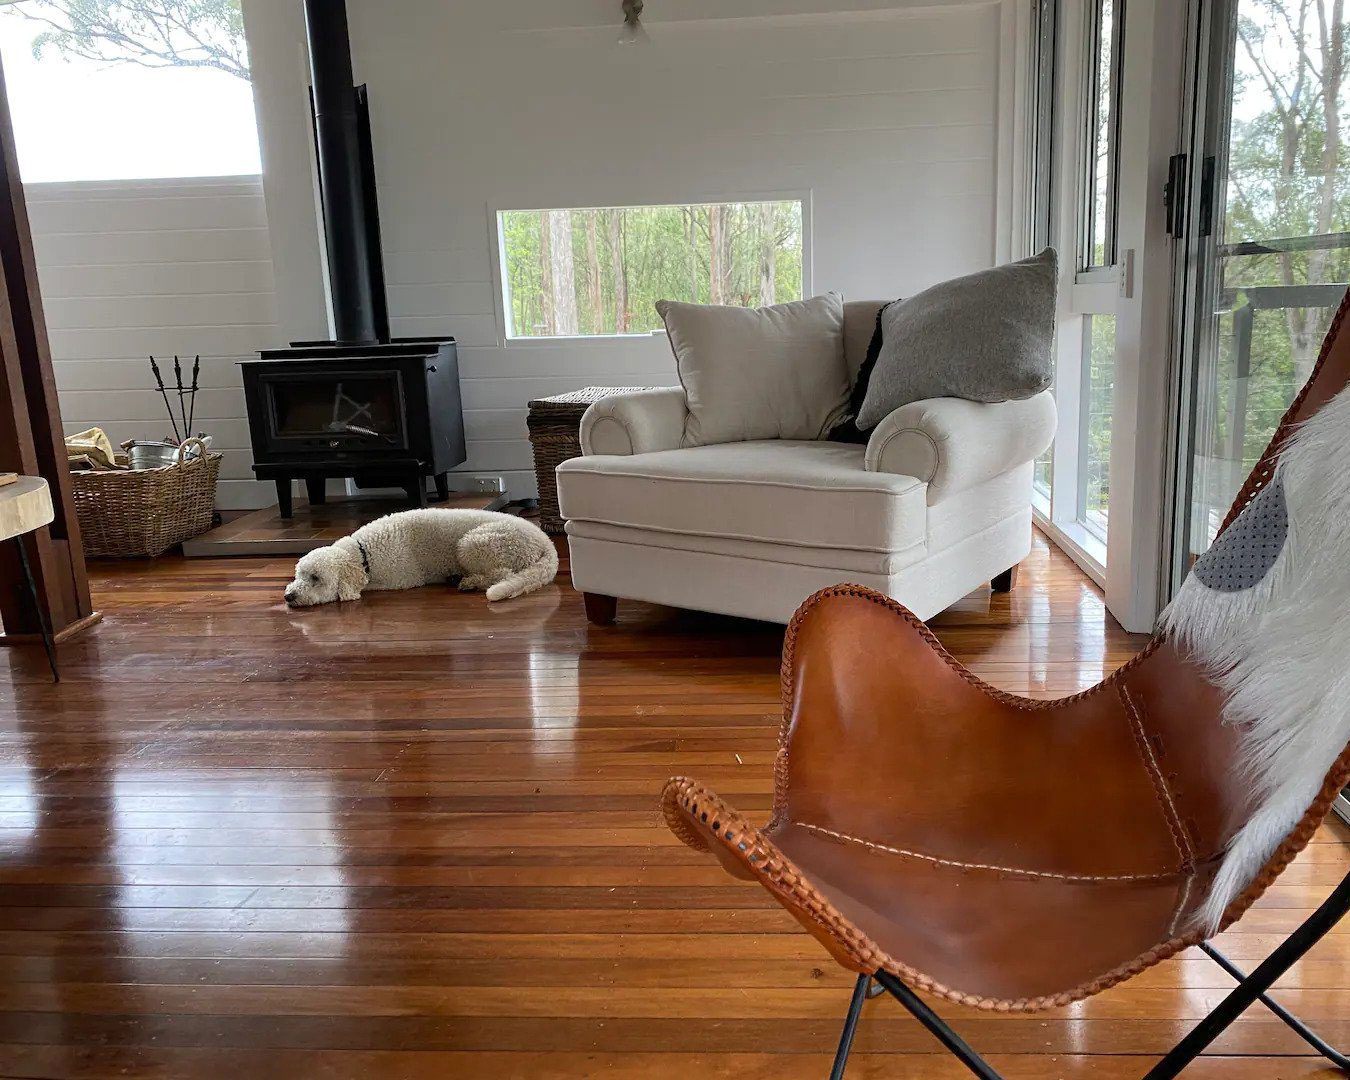 Dog in Airbnb living room